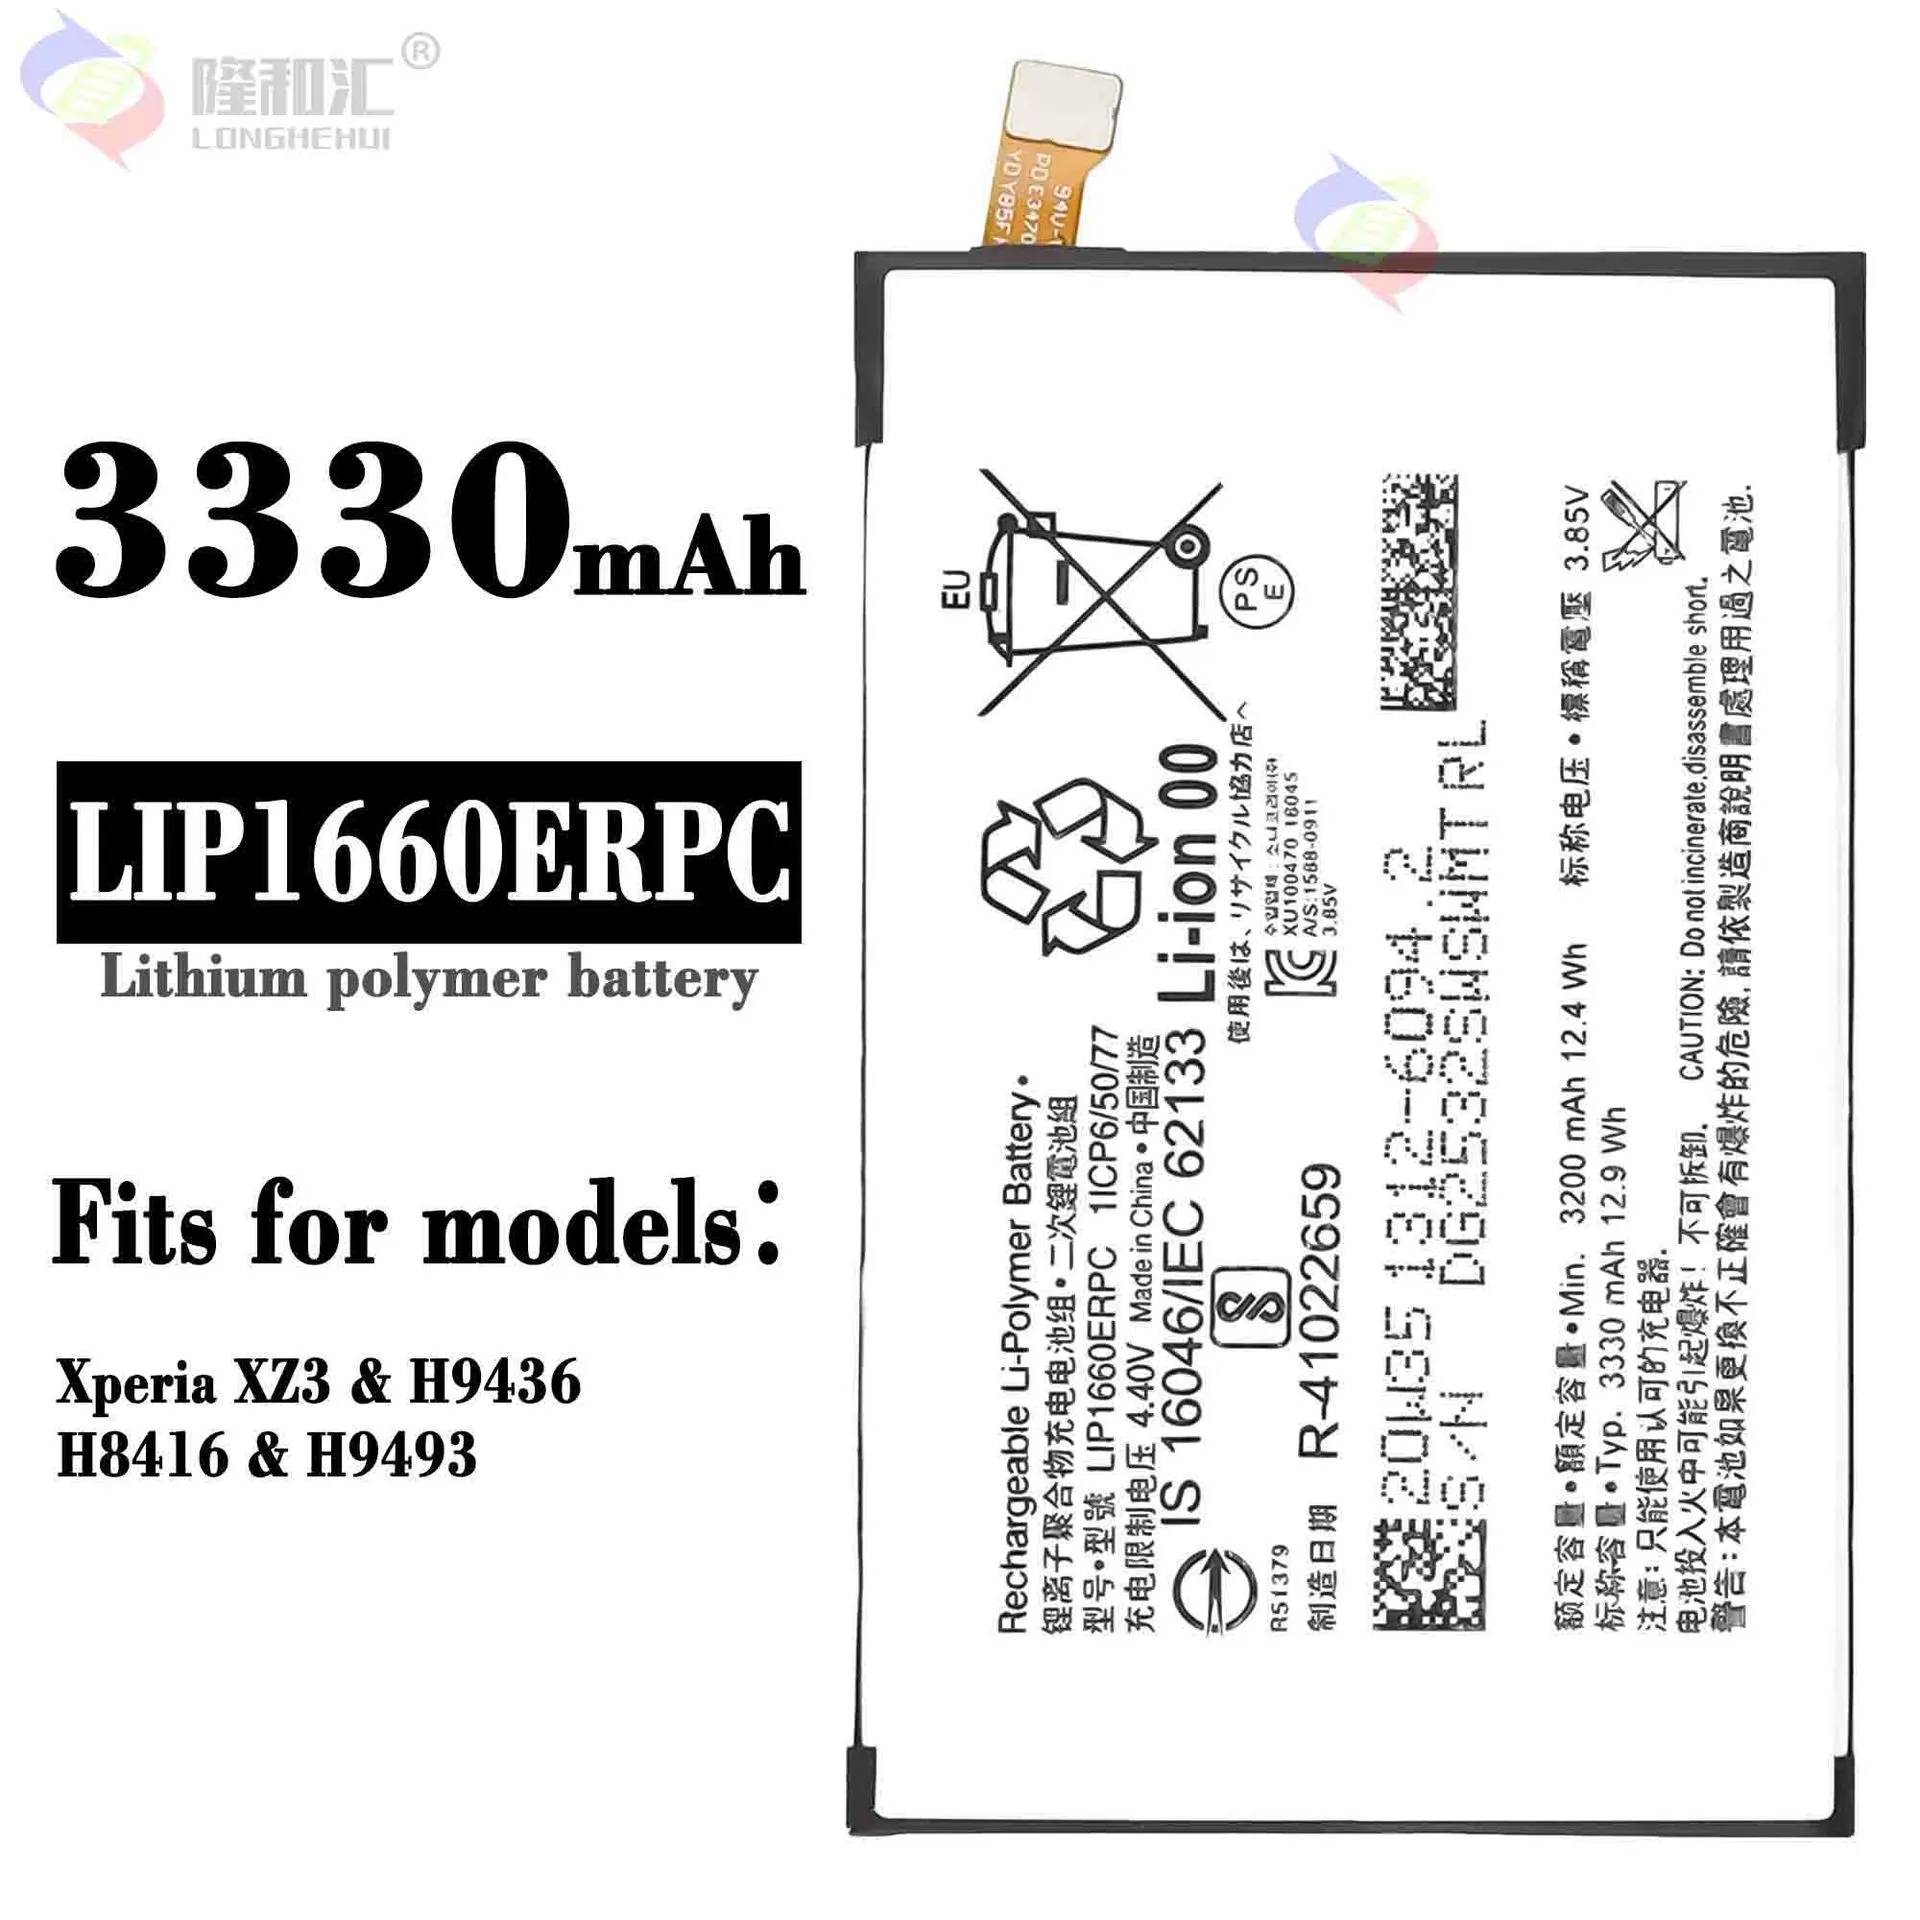 1x 3200mAh LIP1660ERPC Replacement Battery For Sony Xperia XZ3 H9436 H9493 H8416 Batteries